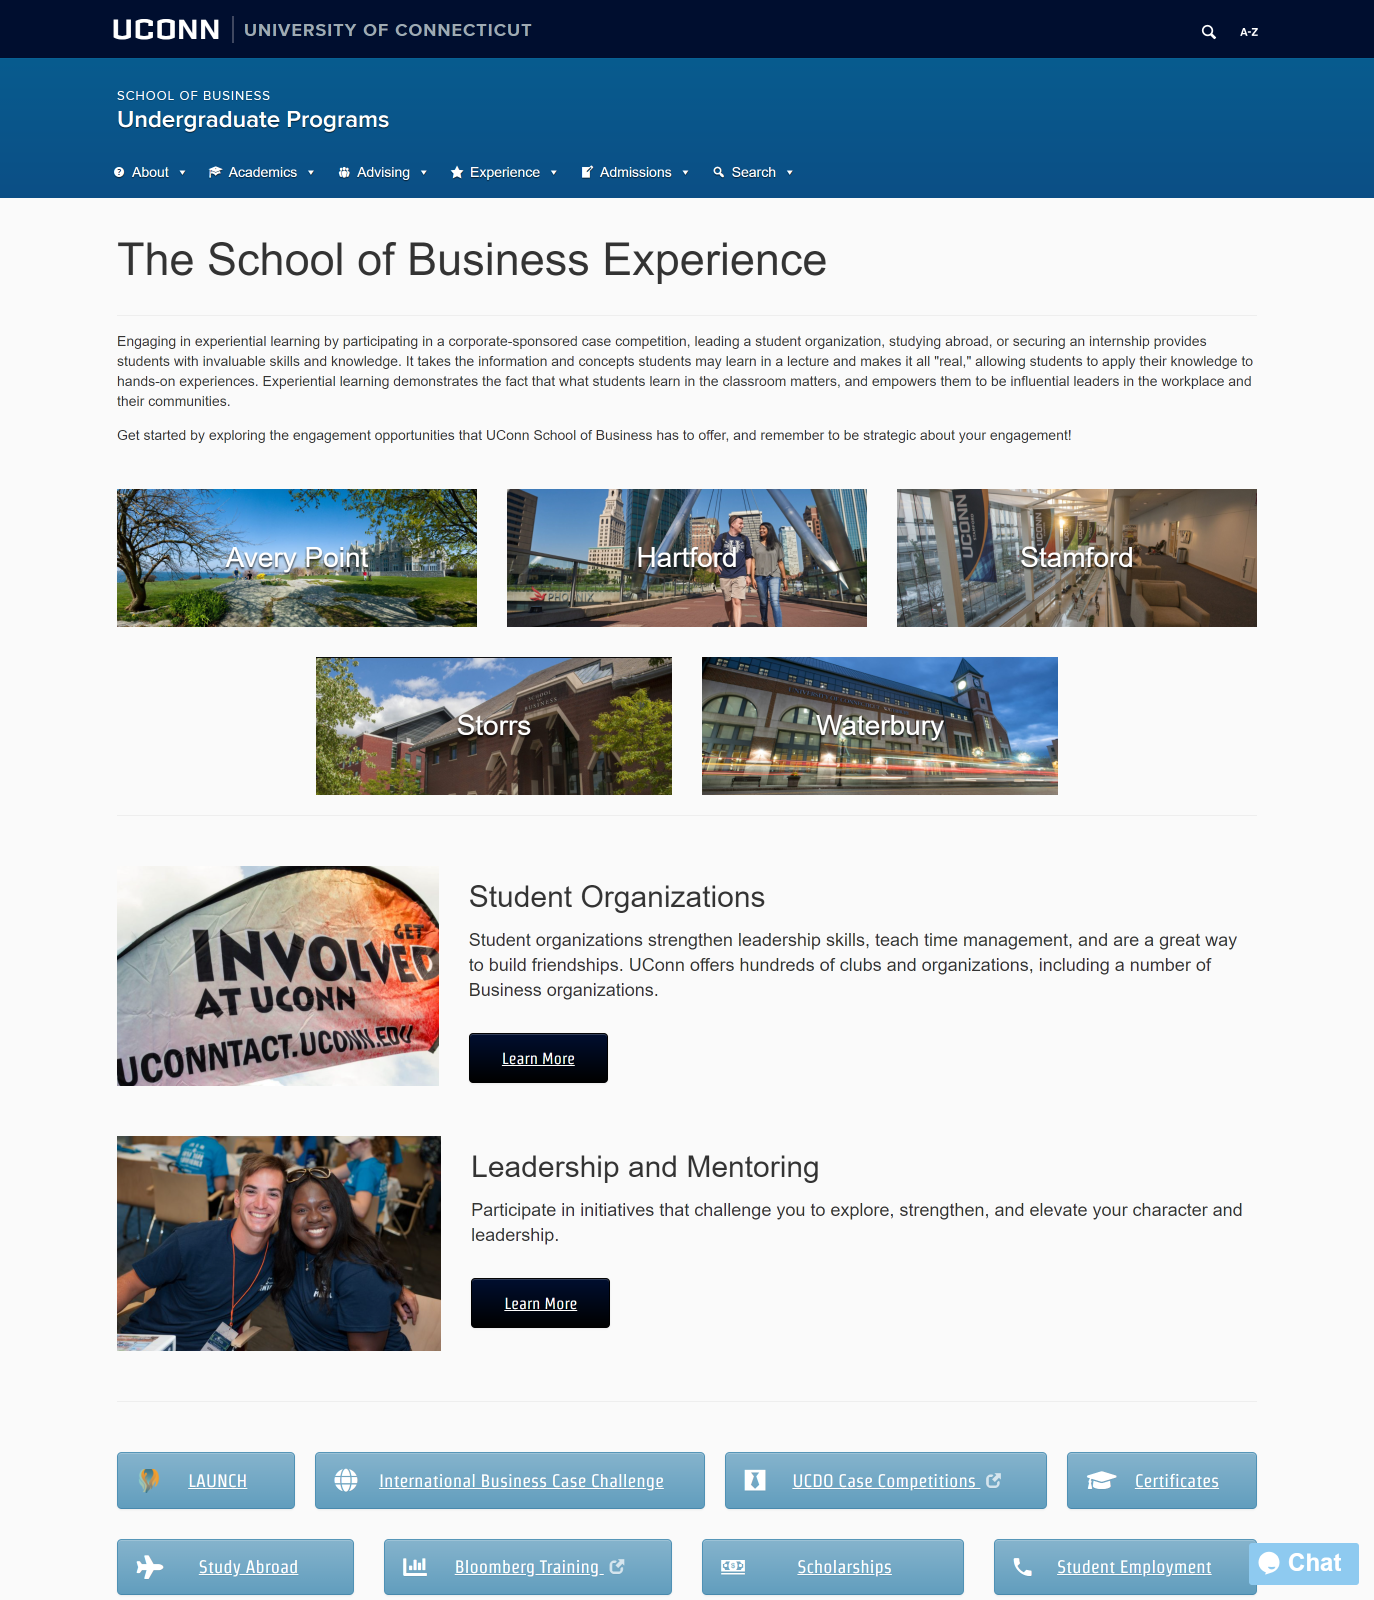 Screenshot of an interior page of the School of Business website